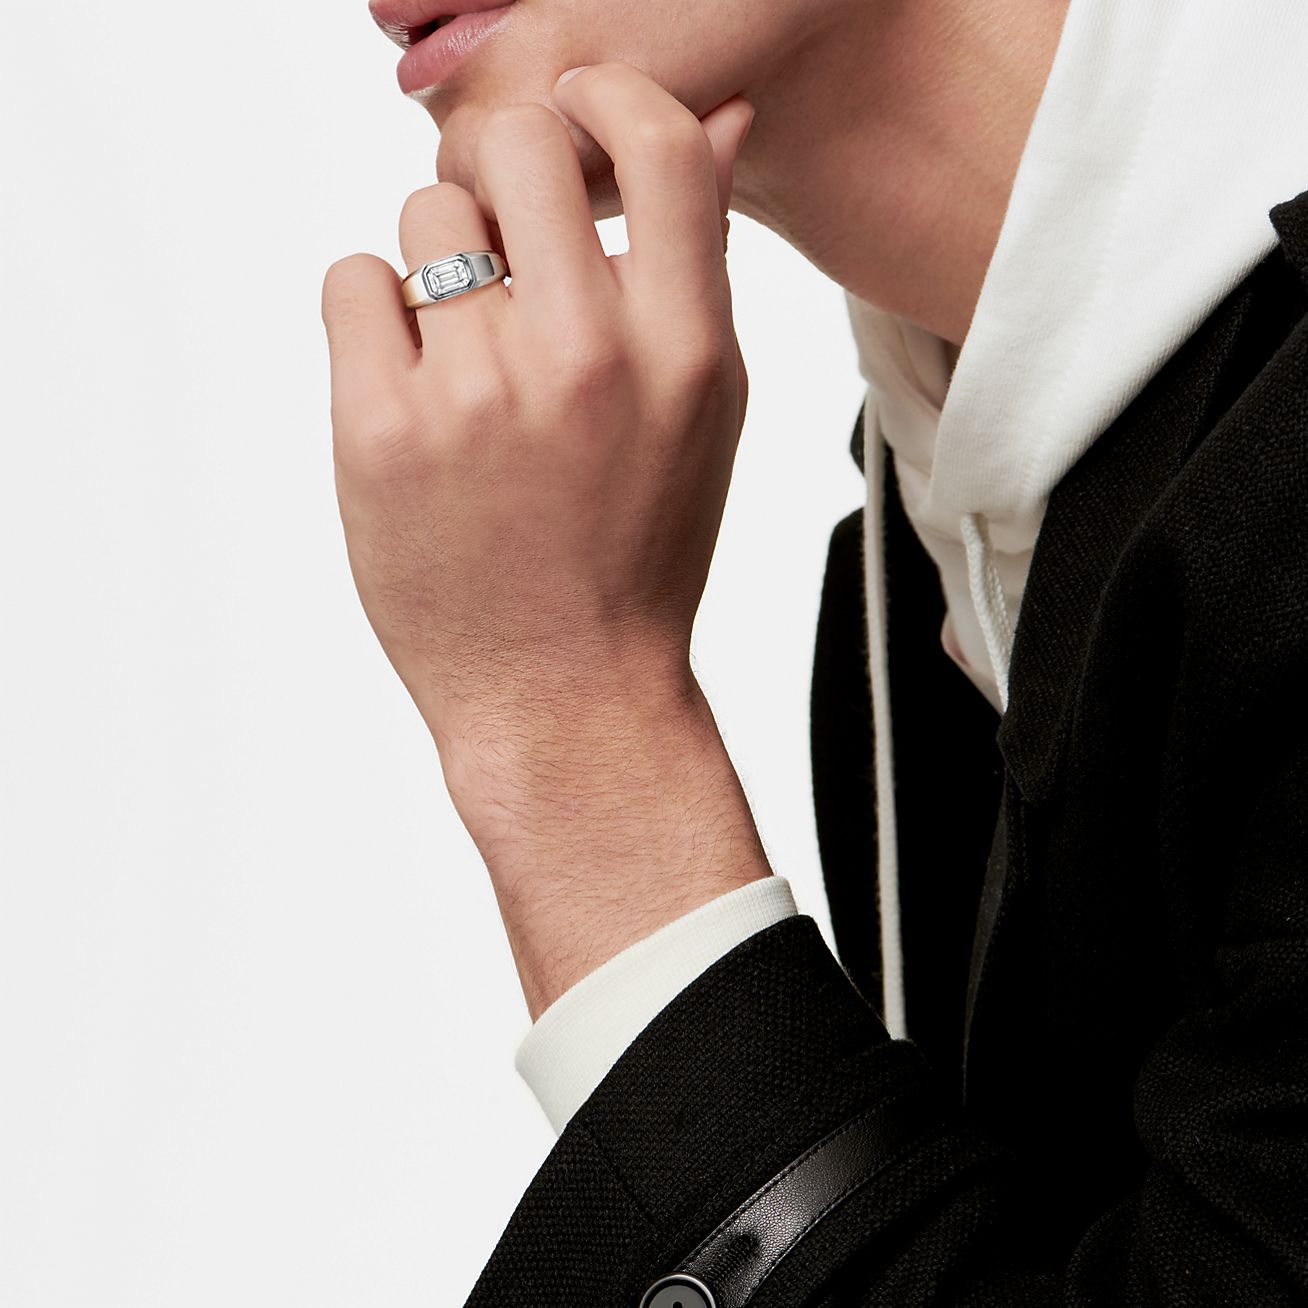 A guide to men's engagement ring - The Caratlane